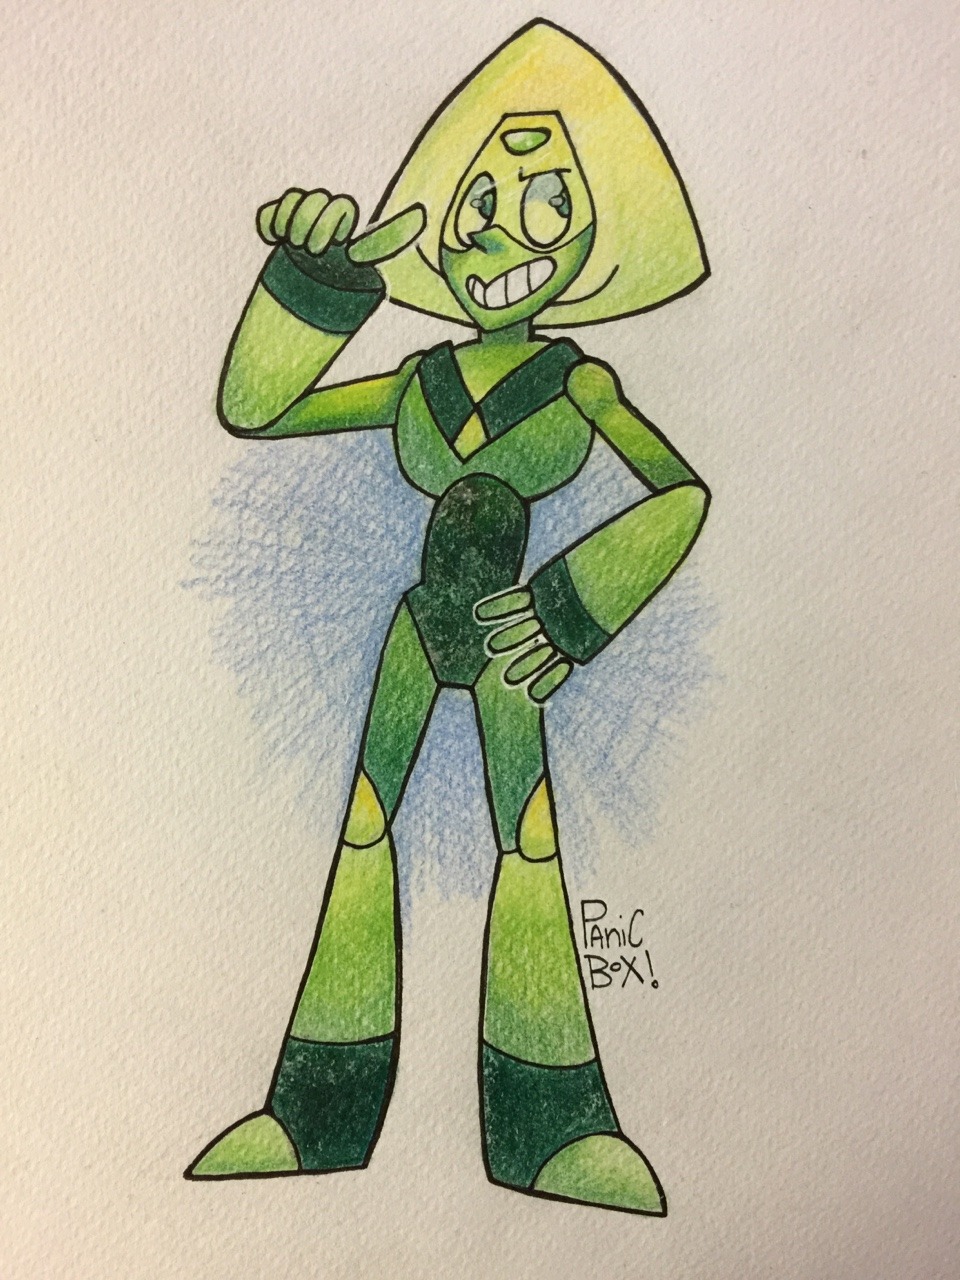 I was chatting with @strangealiencollectinggalaxies and they mentioned that their fav Steven Universe gem was Peridot so I decided to draw her. I went with big Peri first but I’ll prolly draw small...